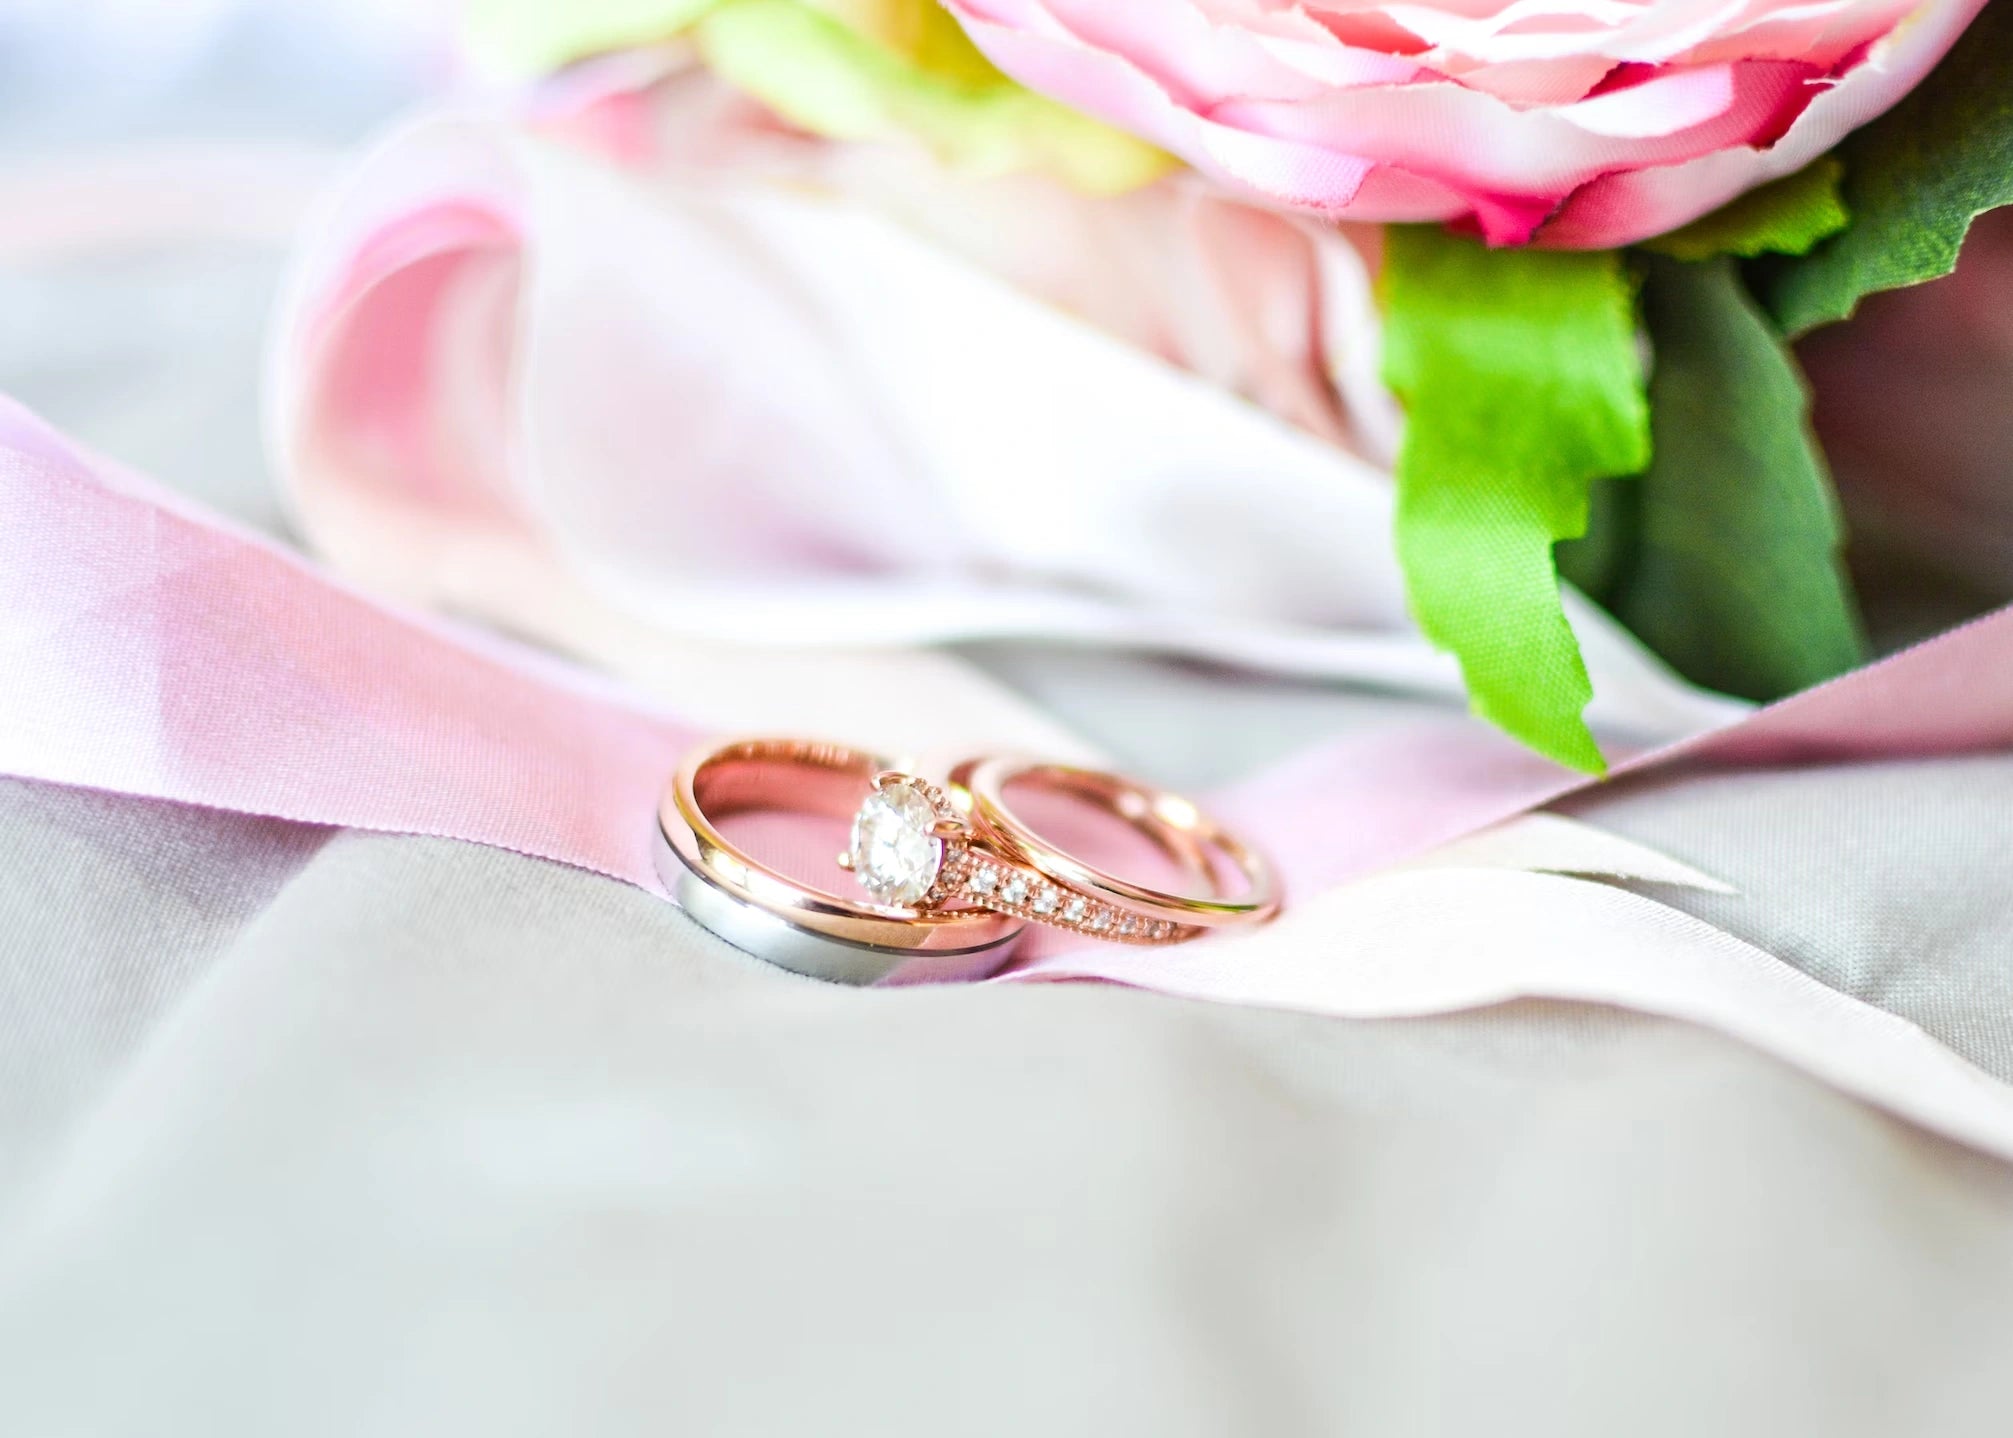 An engagement ring, radiant on pink cloth with a hint of rose, whispers timeless love amid delicate elegance